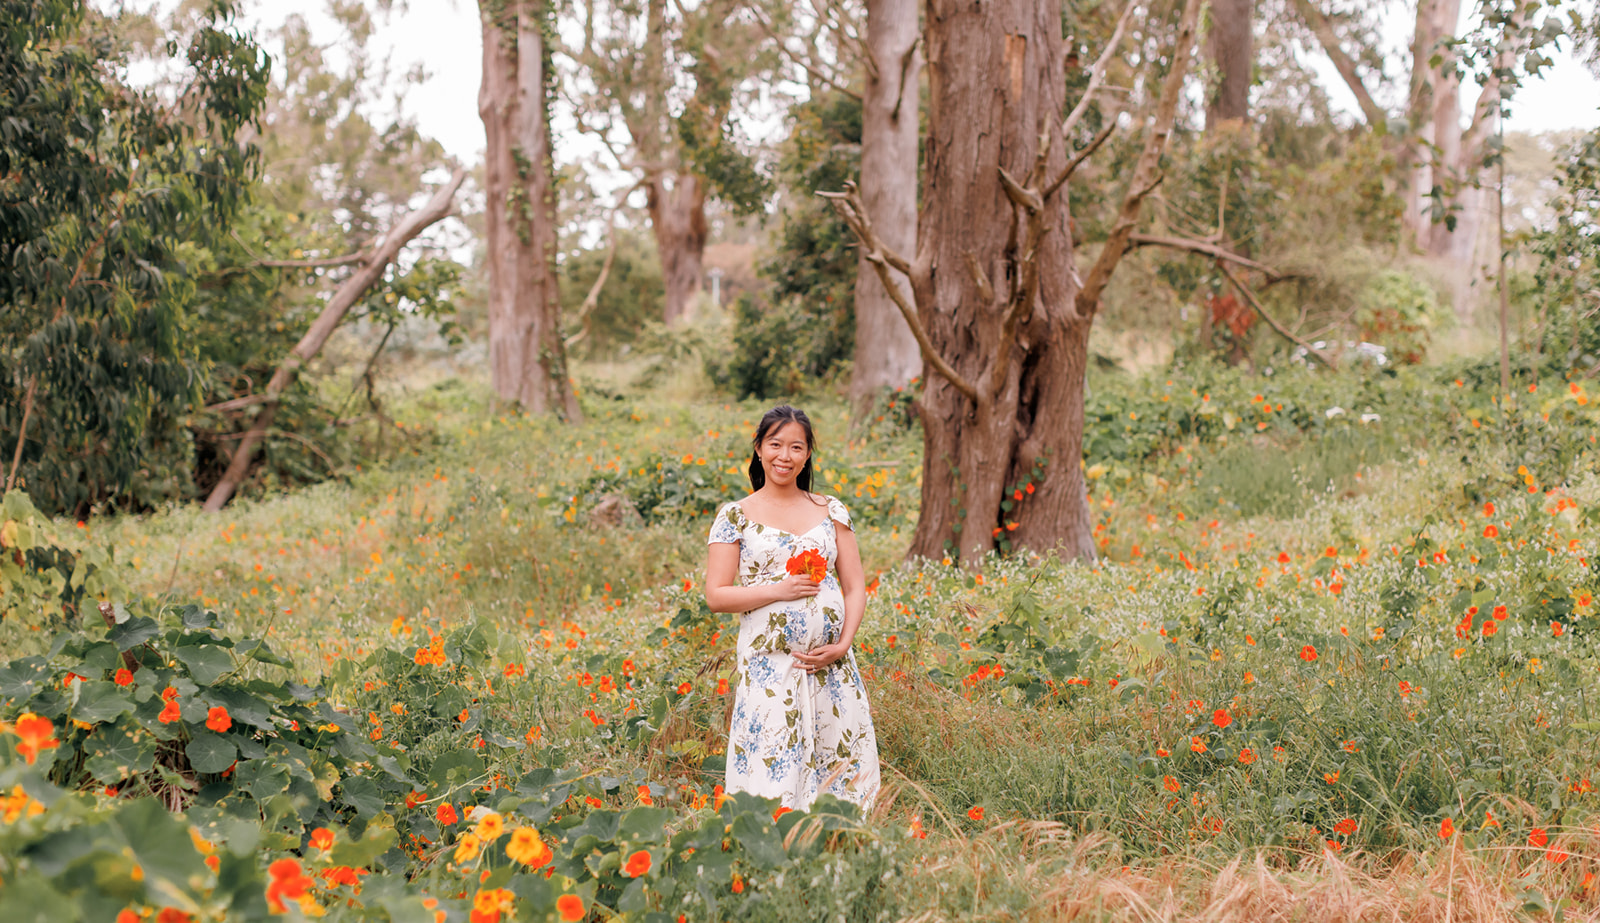  Natural maternity photo shoot, and beautiful grassy area with wildflowers inside Golden Gate Park in San Francisco